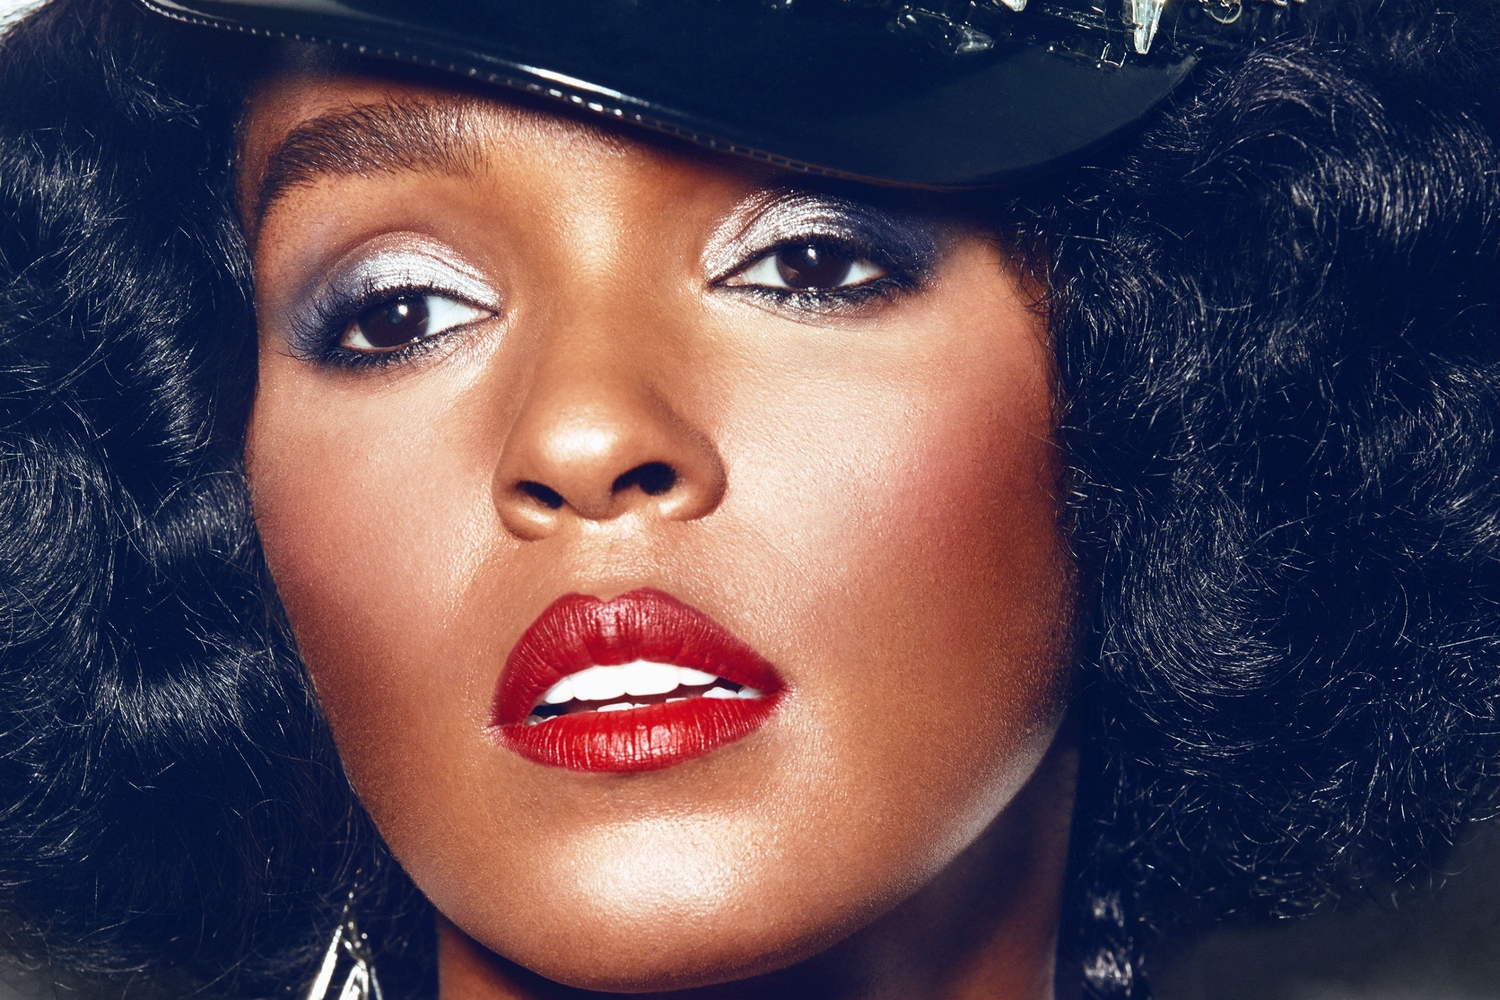 Watch Janelle Monáe perform songs from ‘Dirty Computer’ live